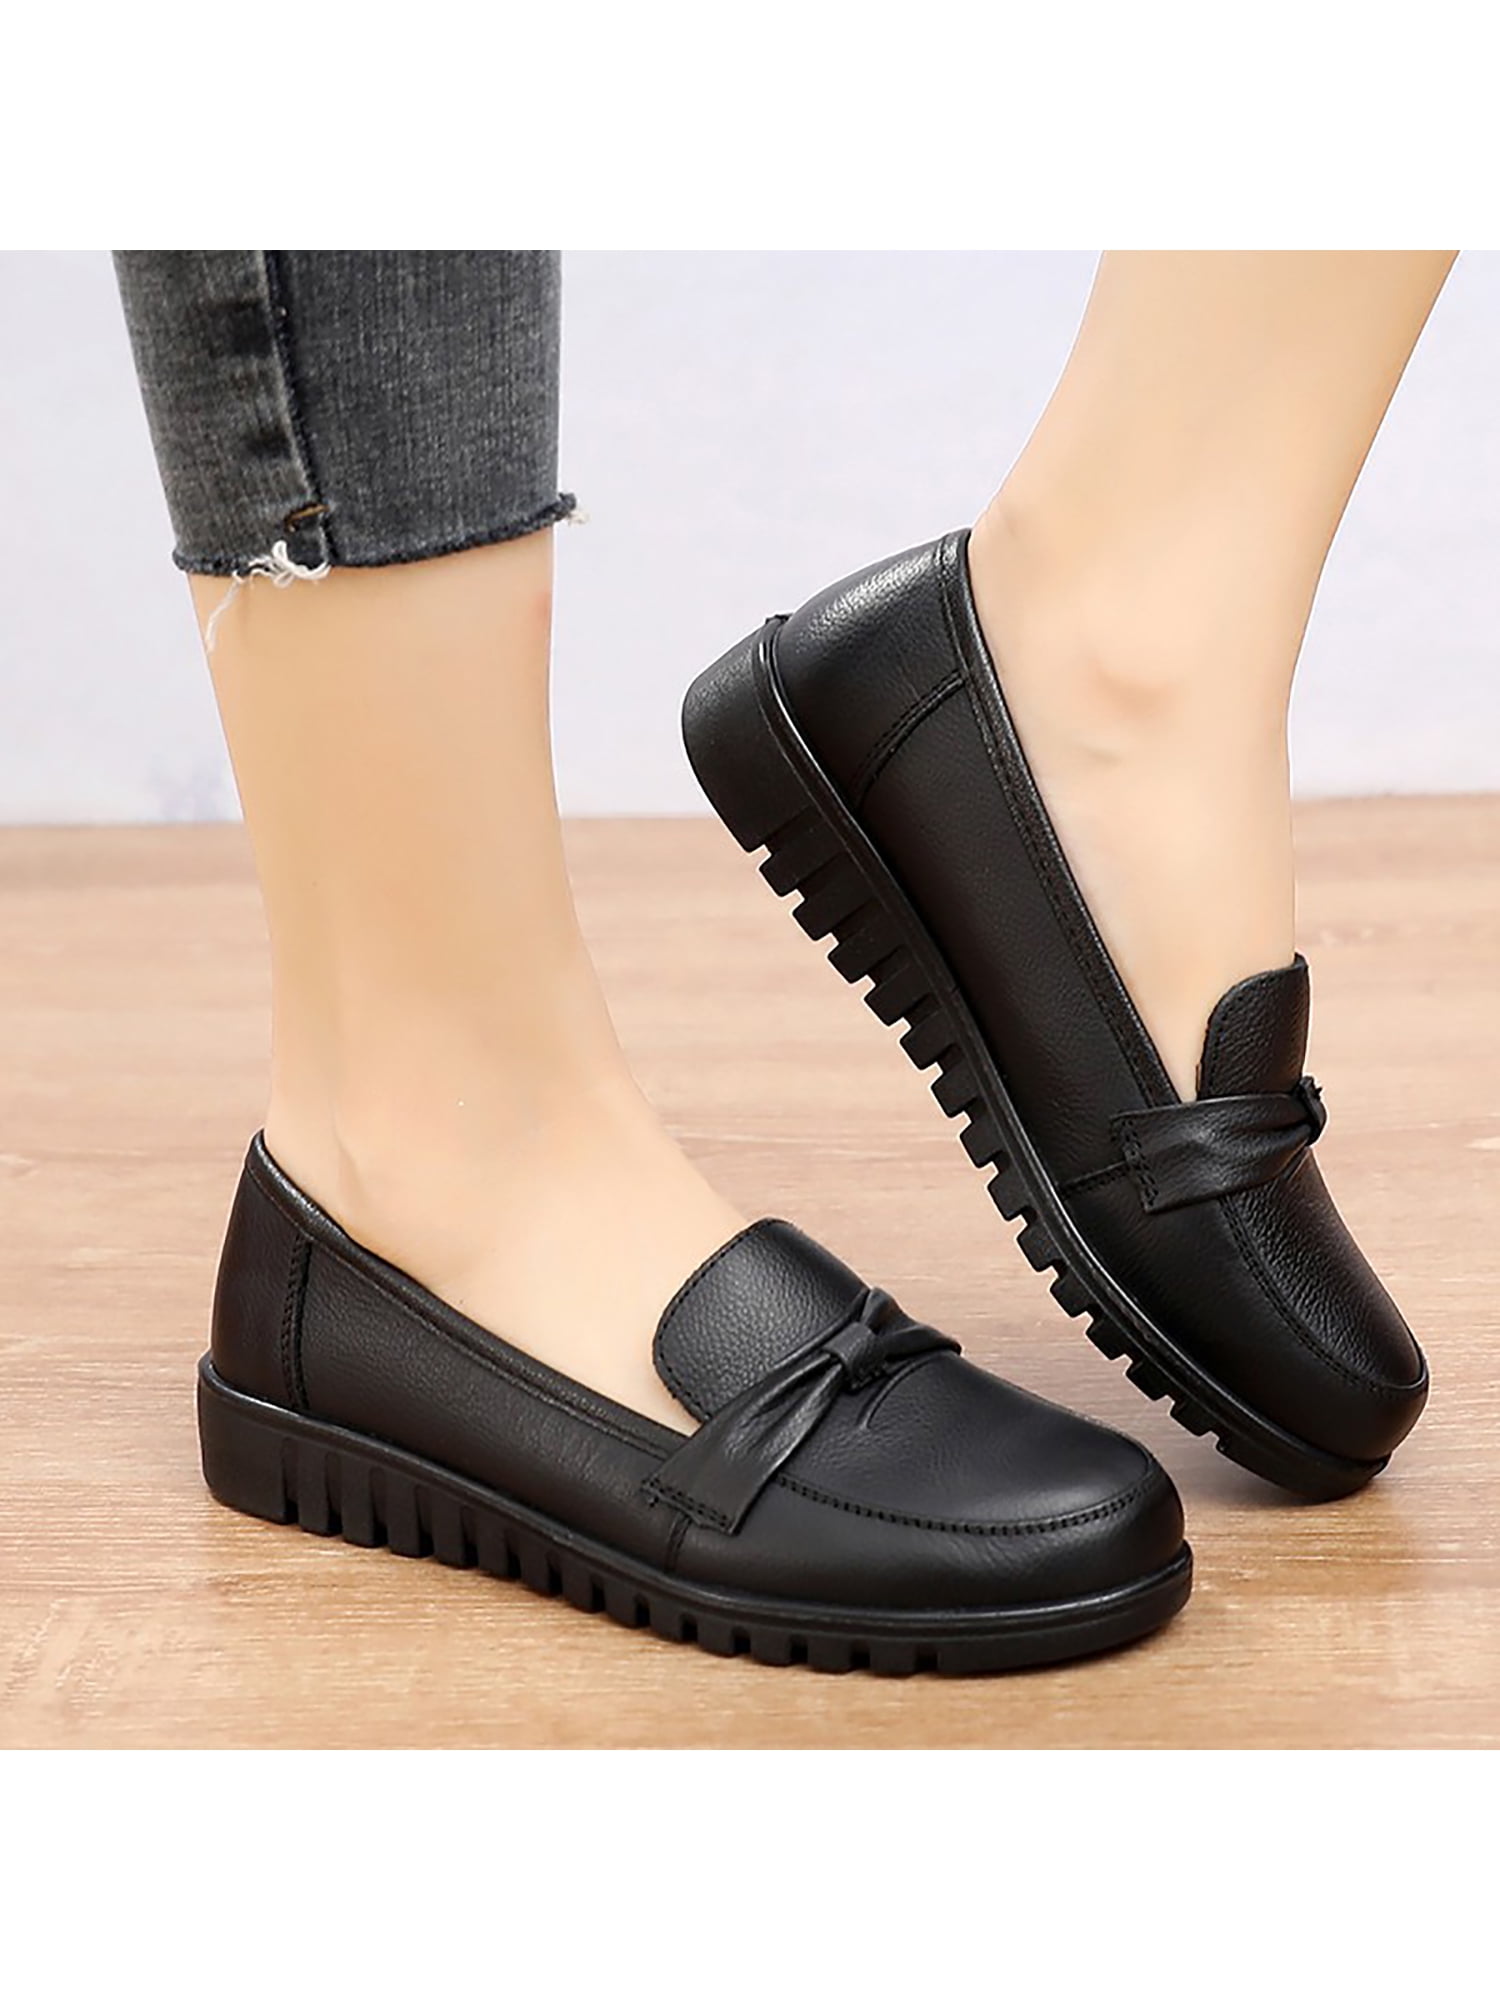 Womens Loafers Non Slip on Flat Work Driving Penny Shoes Moccasins Comfort Shoes - Walmart.com